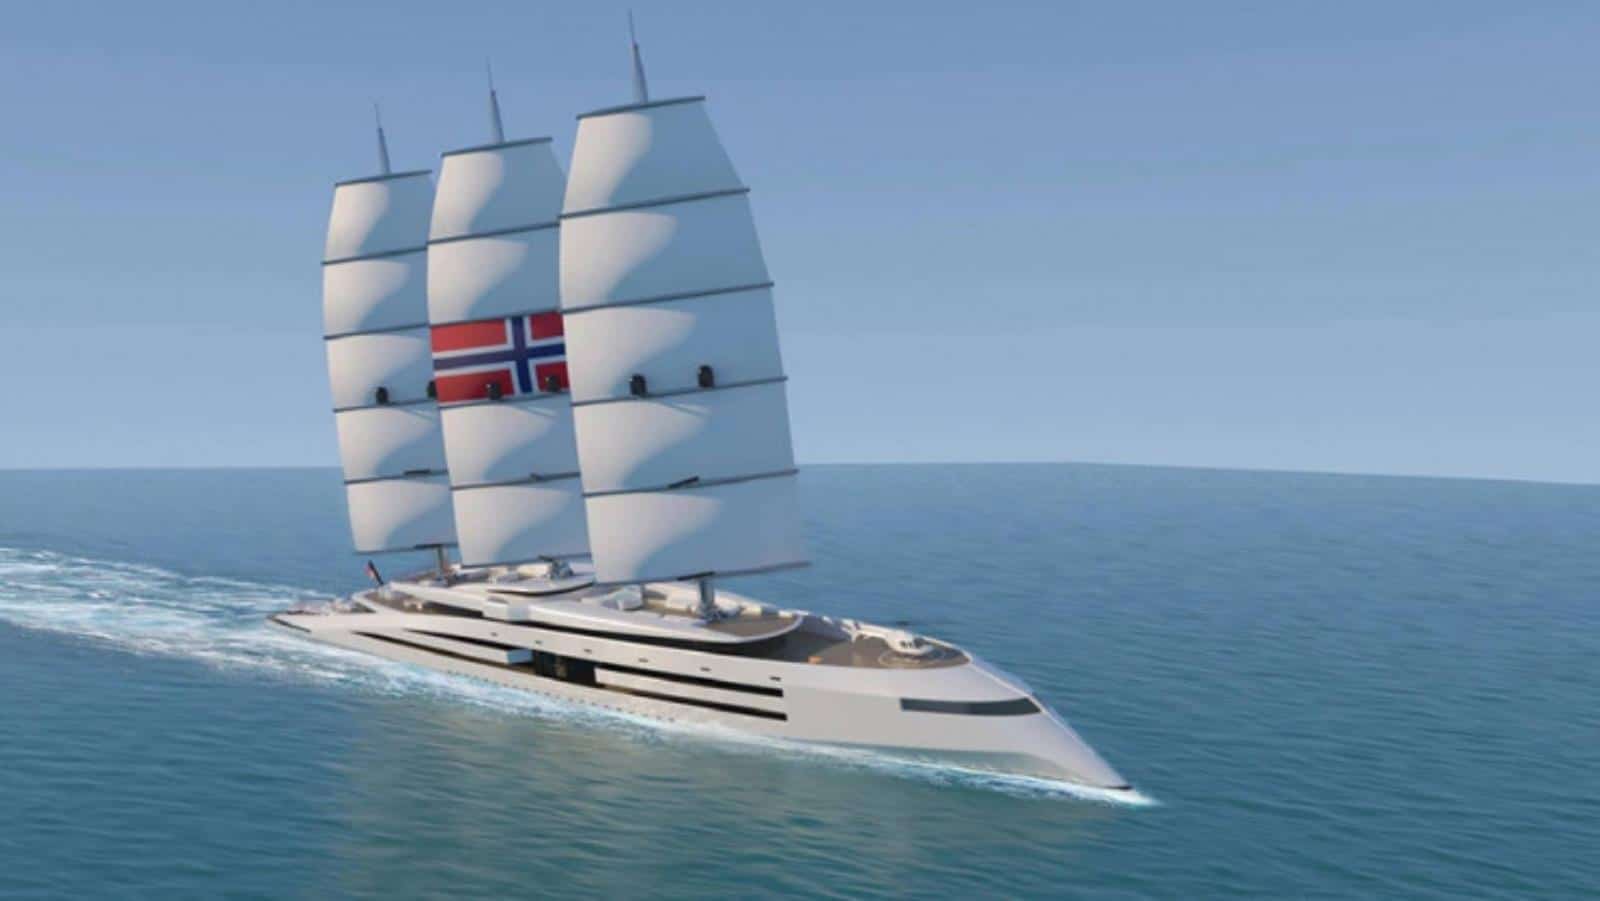 The zero-emission superyacht Norway owes its uniqueness to sails straight from the Langskip